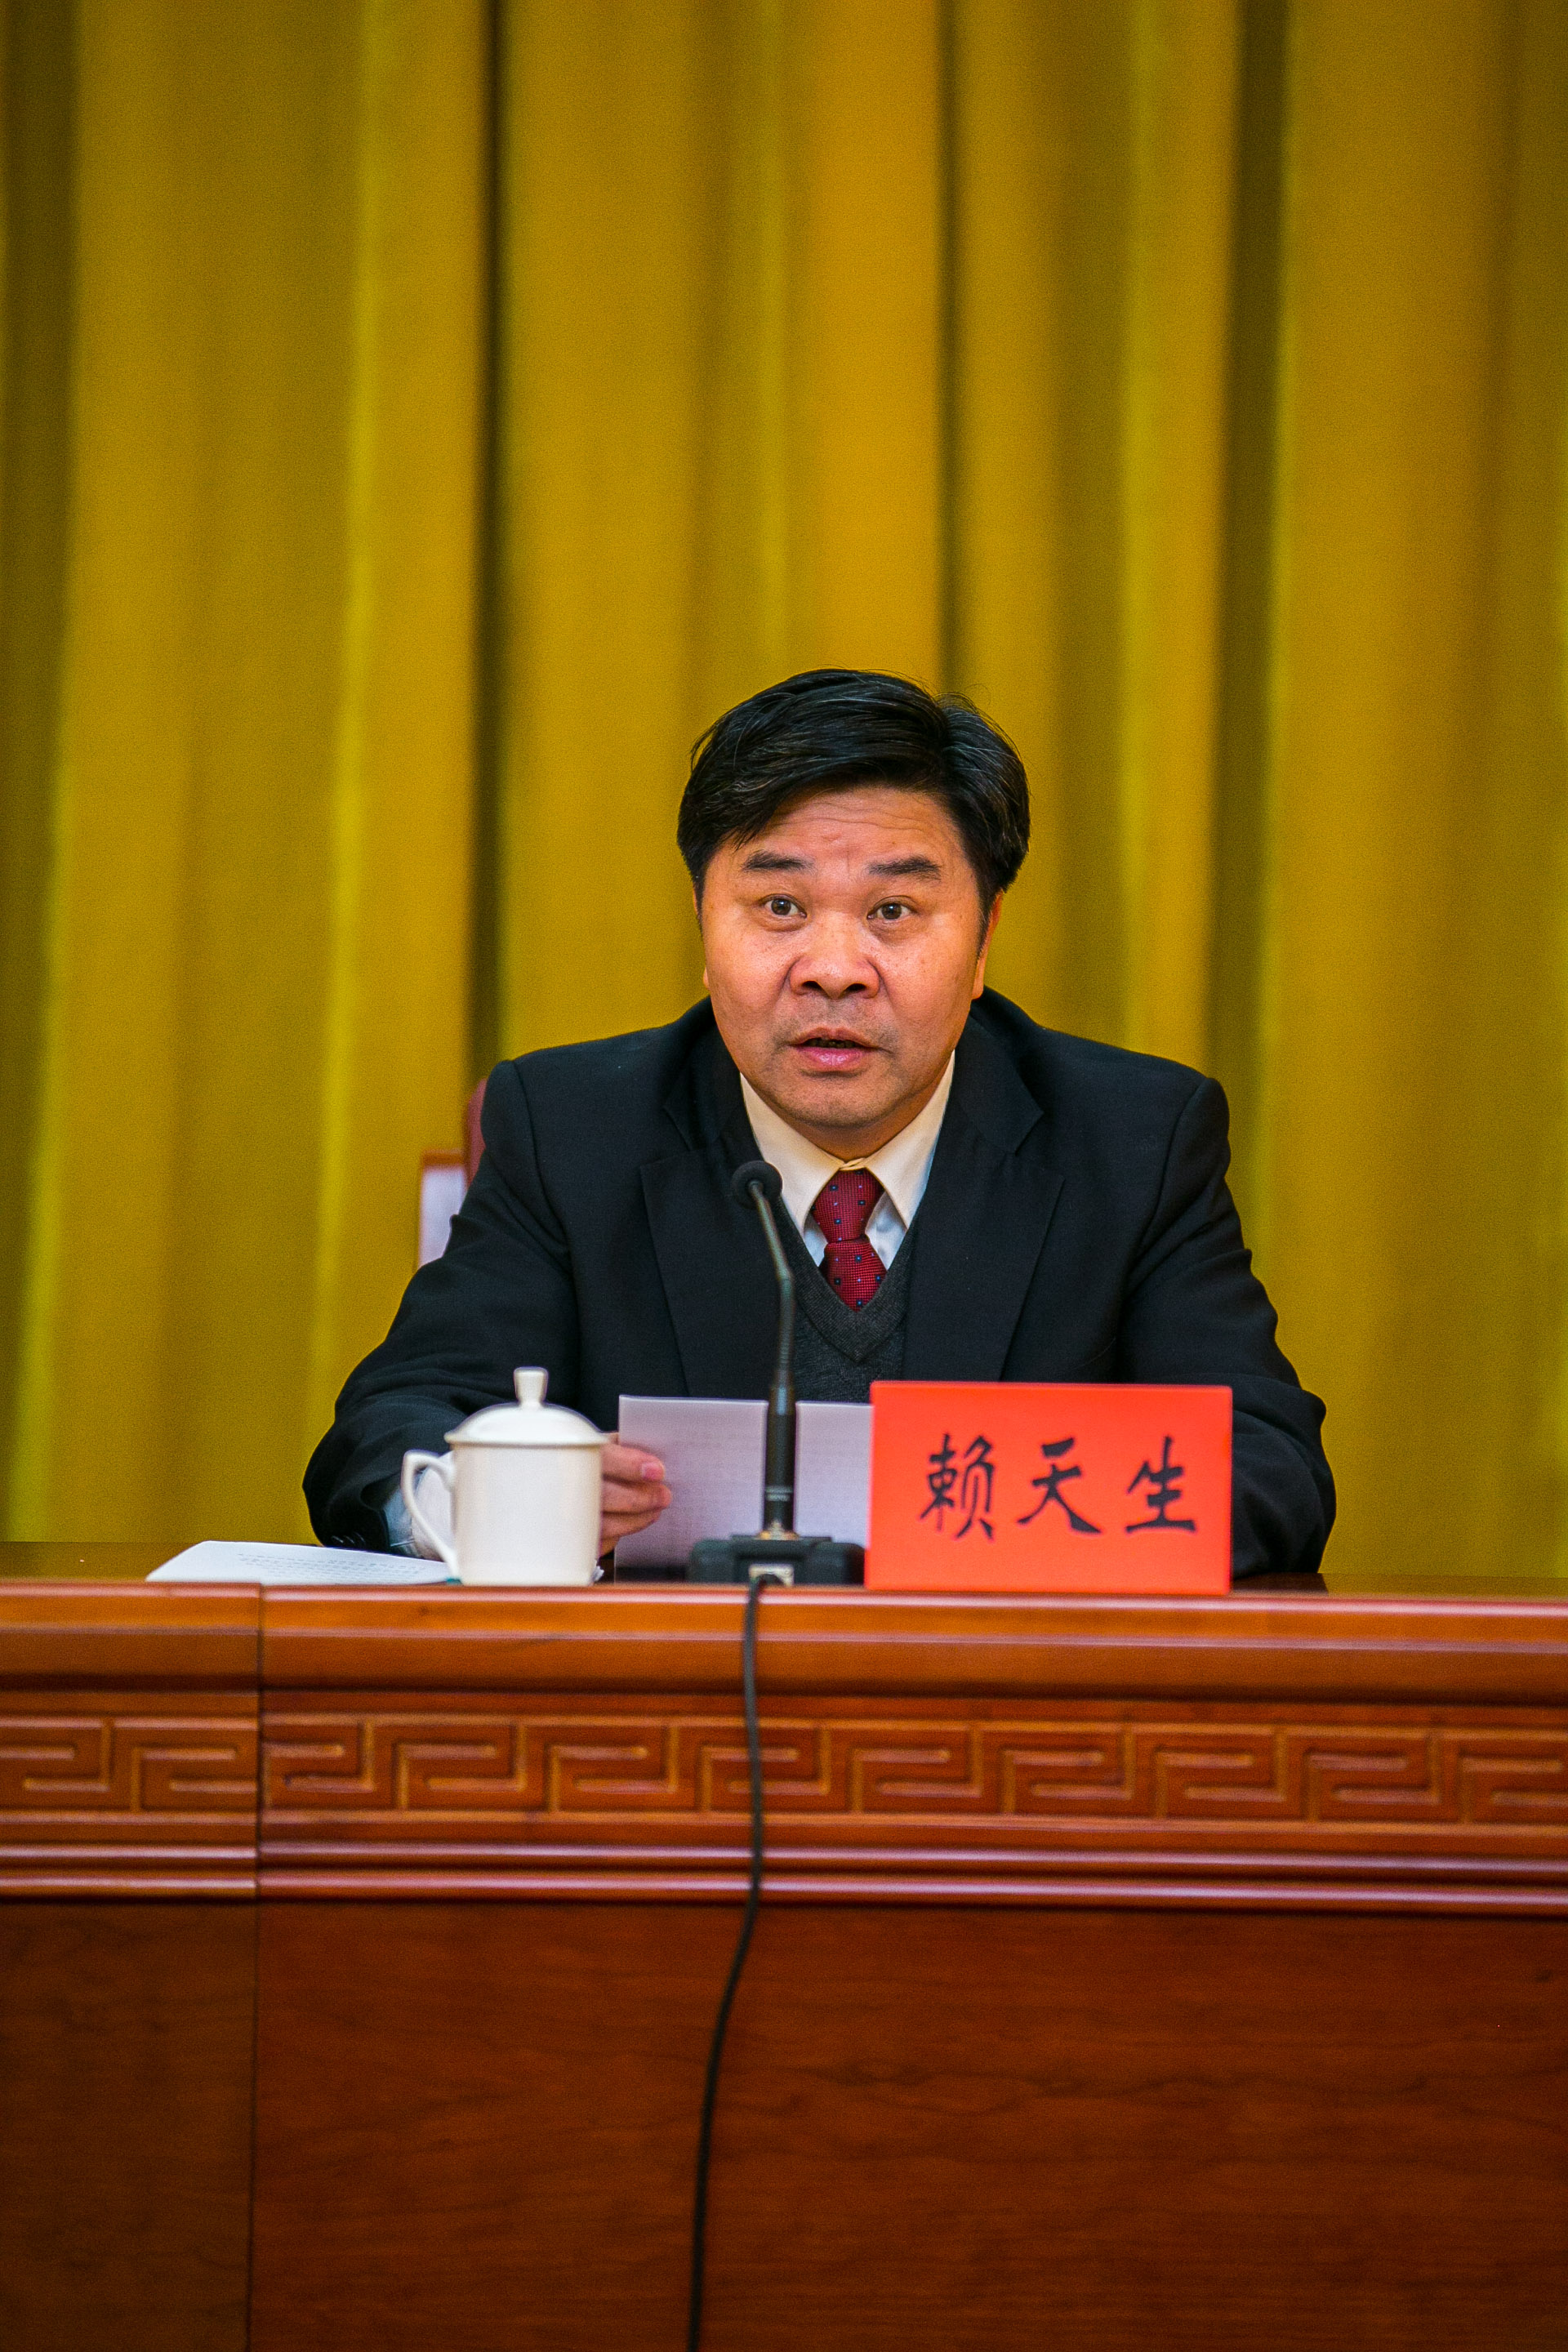 Mr. Lai Tiansheng, Director-General of the Economic & Information Commission of Guangdong Province